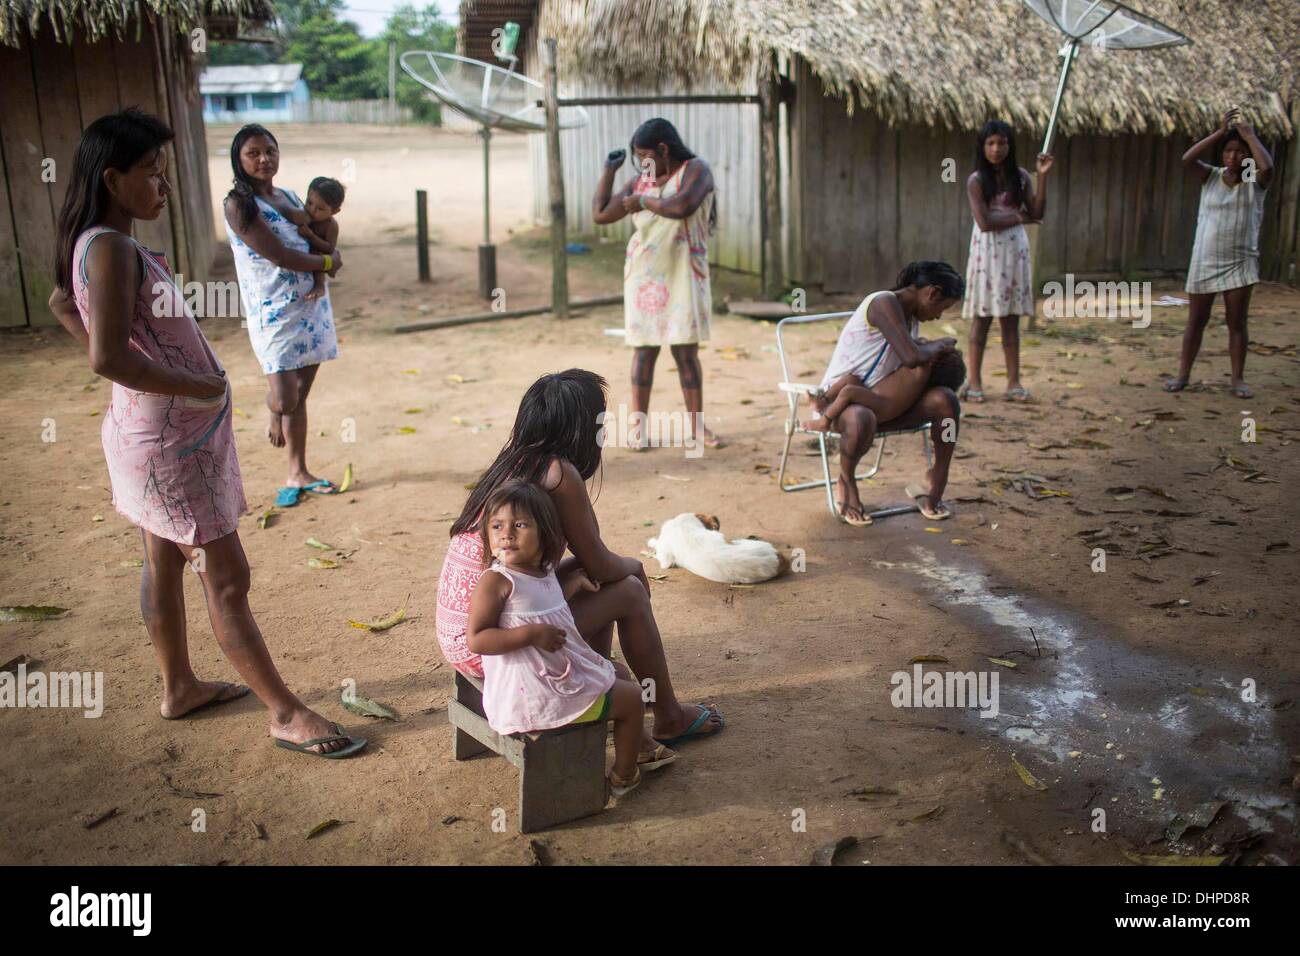 May 6, 2013 - Poti-Kro, Para, Brazil - The Xikrin have distinct gender  roles-while the men spend the day hunting and fishing, women often stay in  the village to care for the